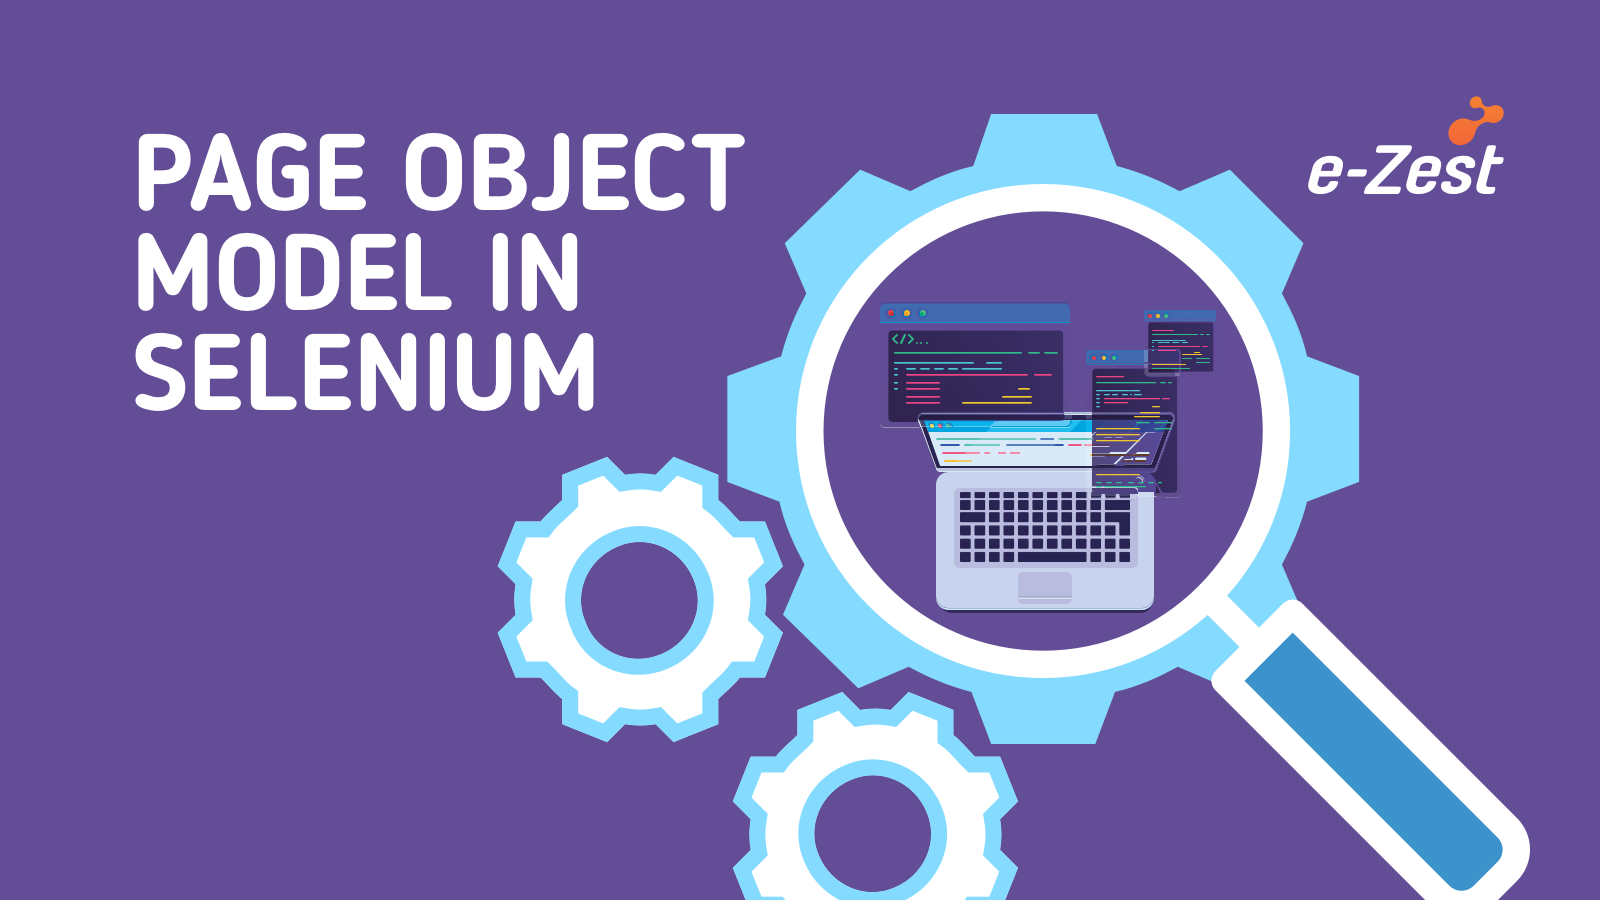 Page Object Model in Selenium